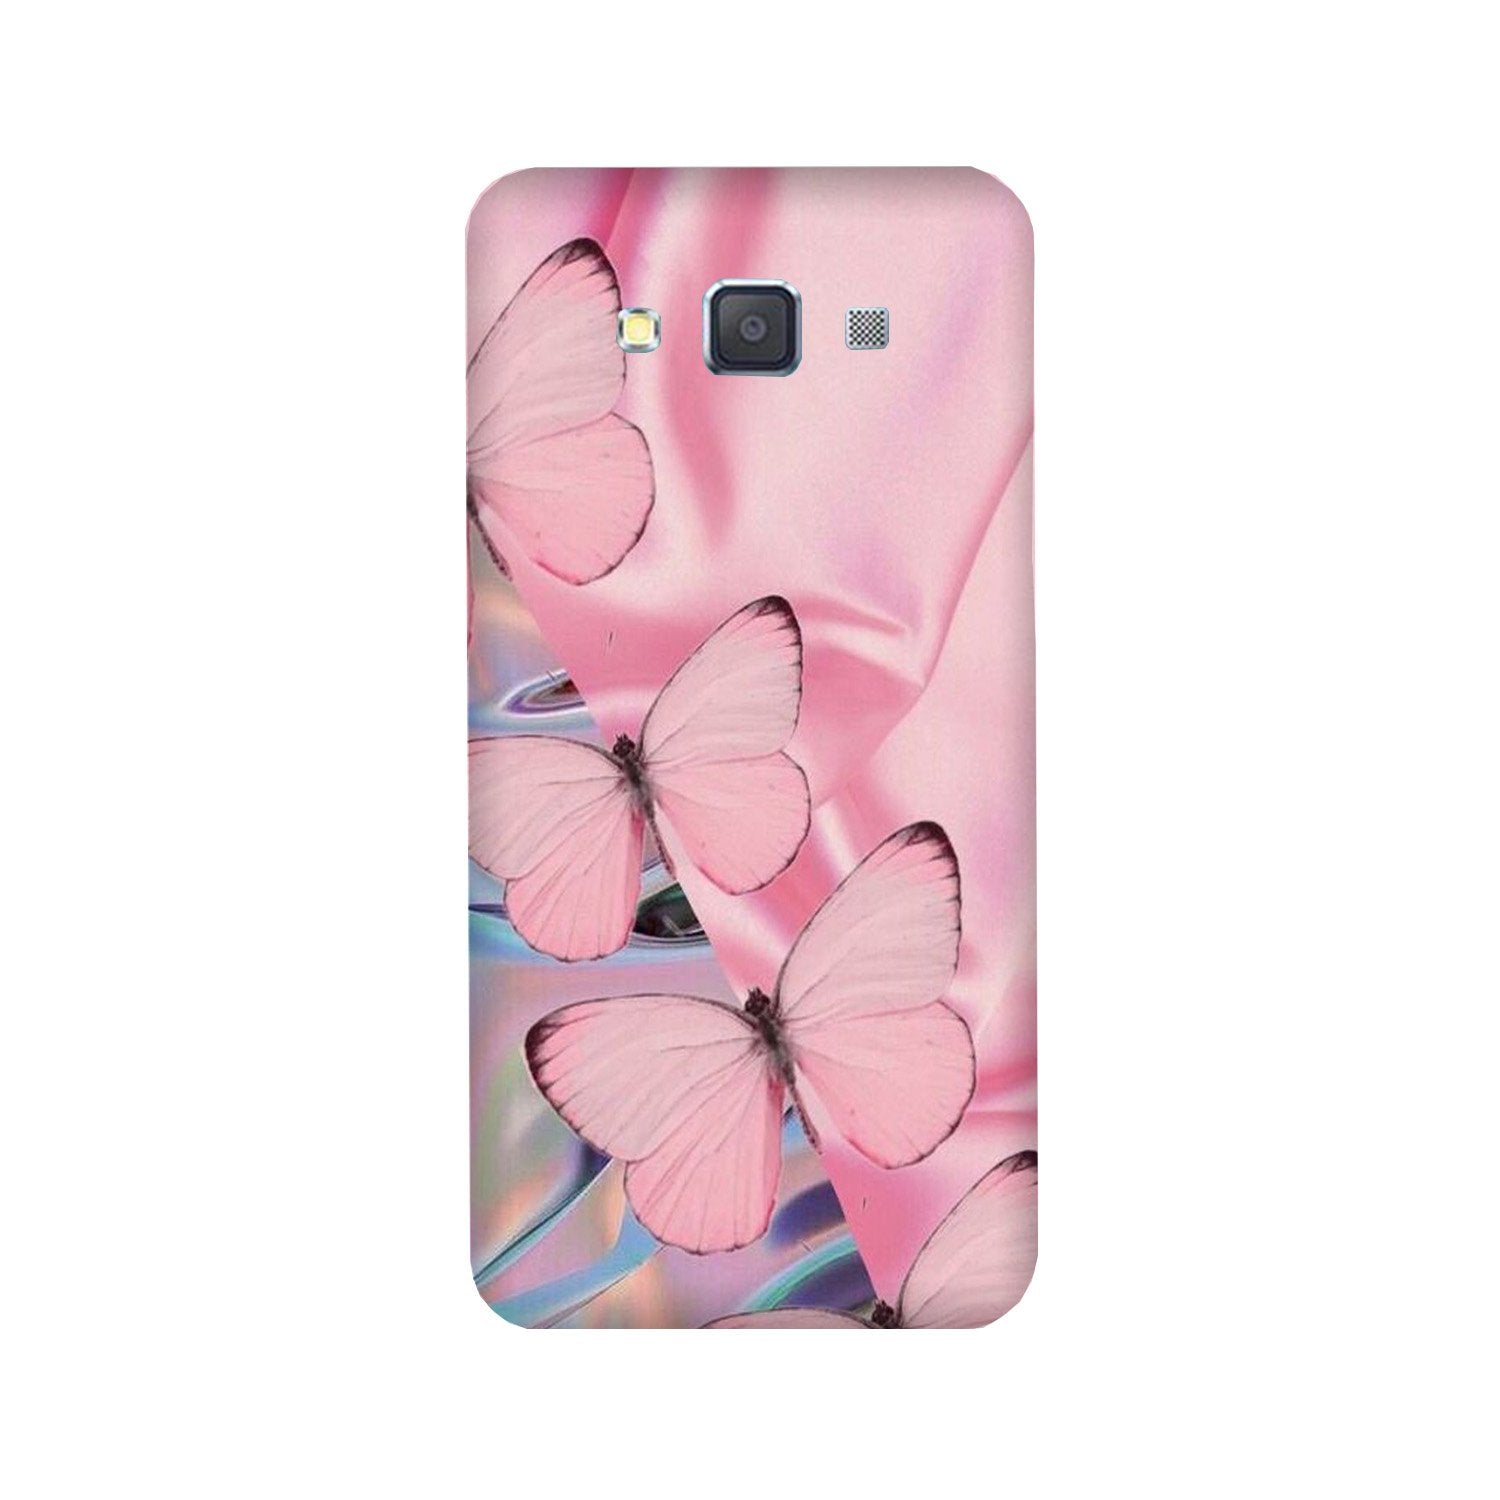 Butterflies Case for Galaxy Grand Max